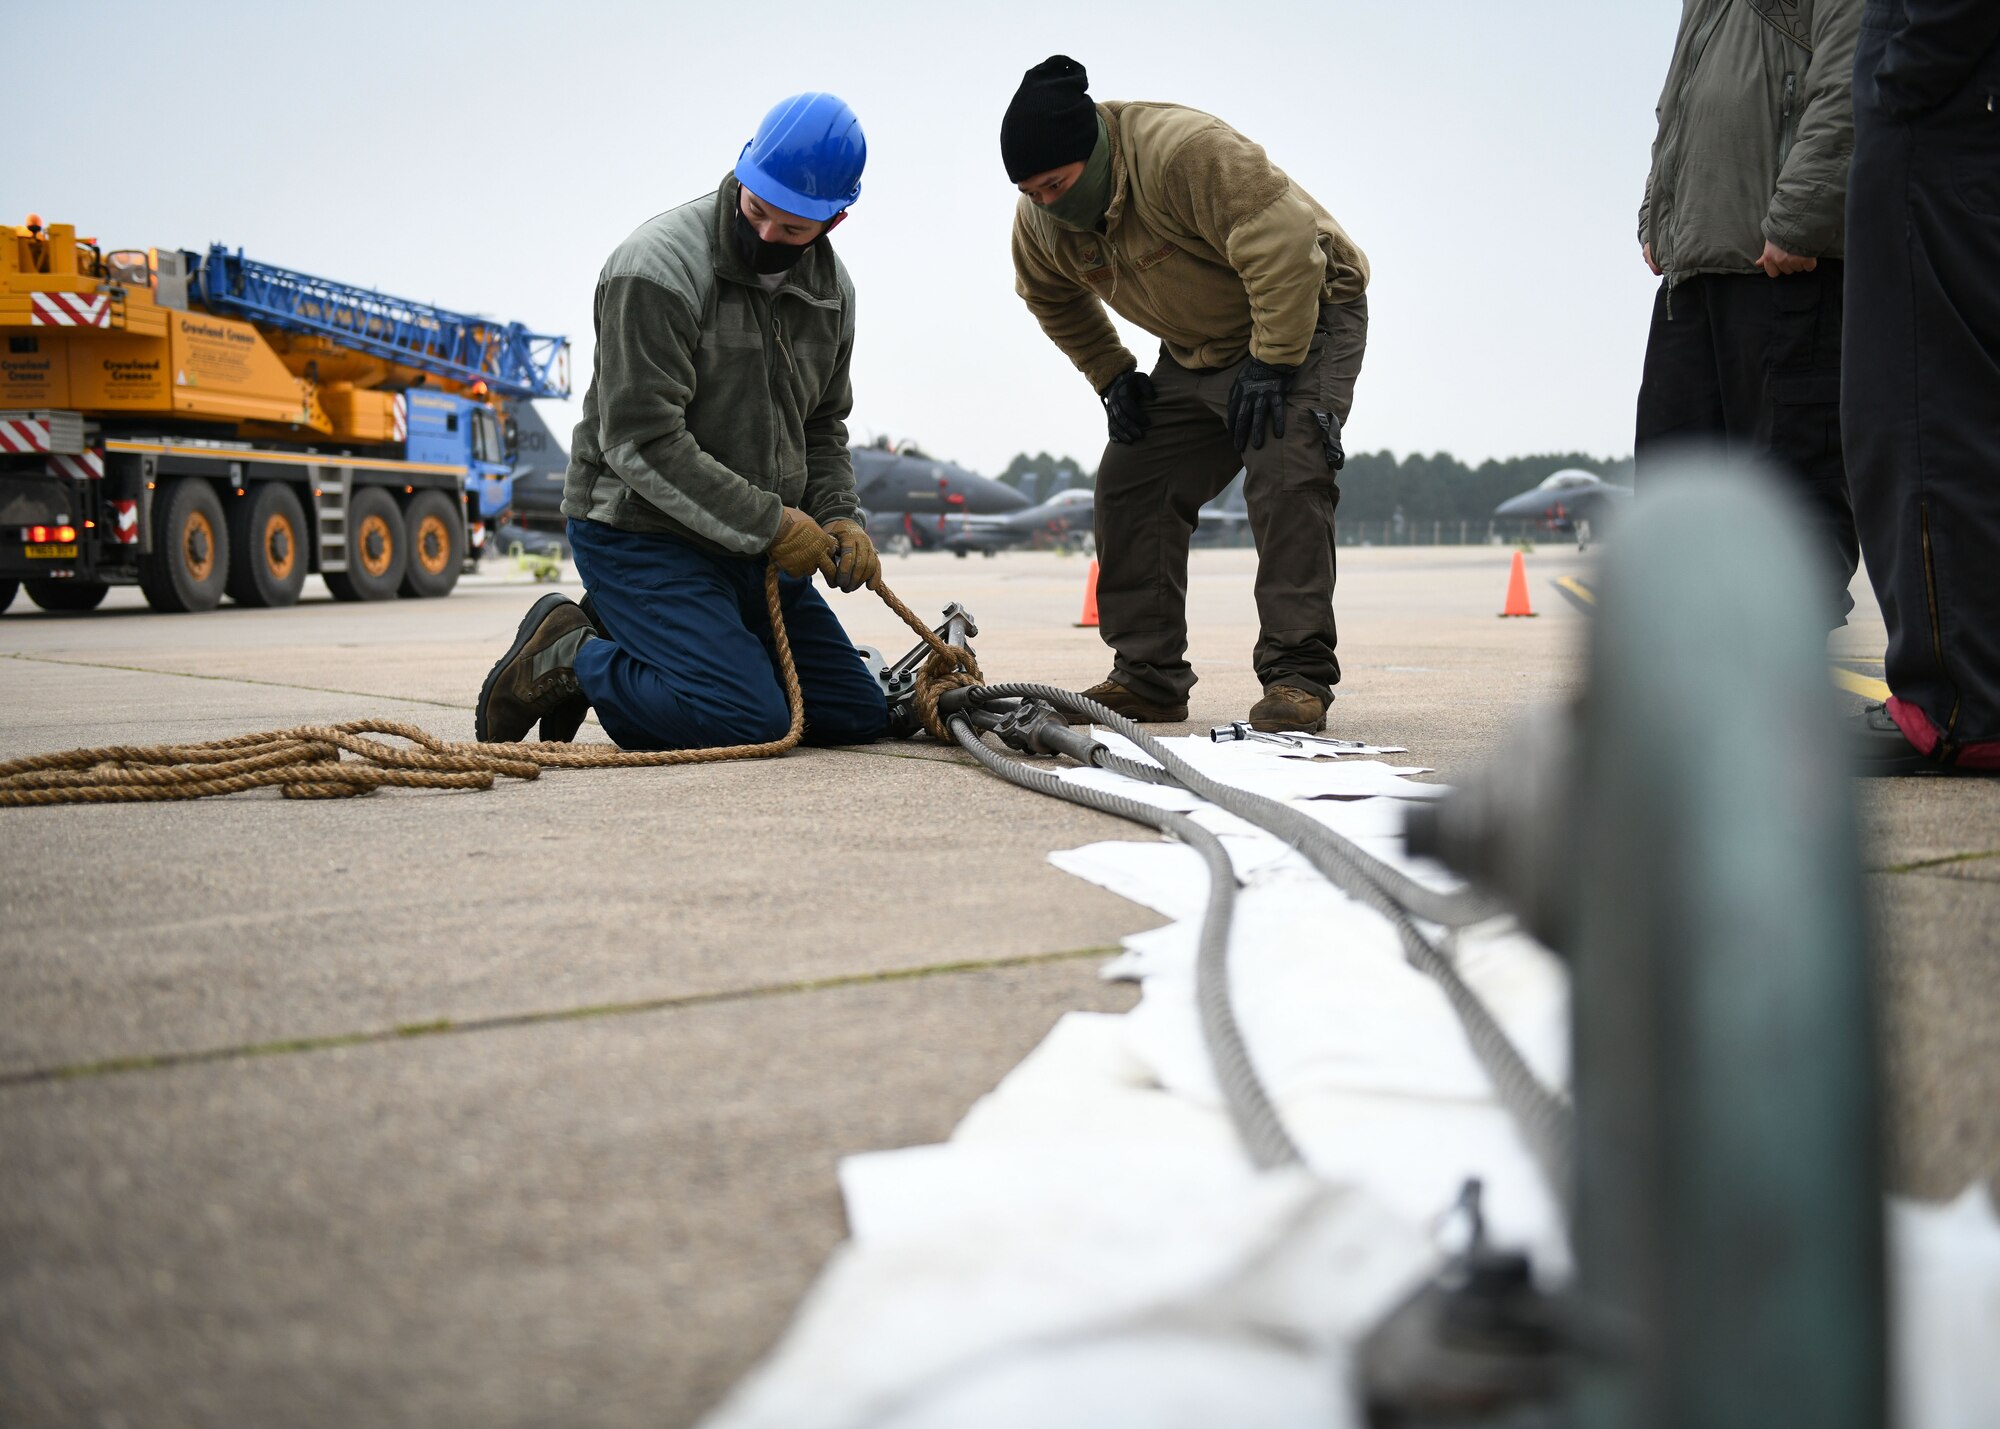 Airmen assigned to the 48th Equipment Maintenance Squadron repair and reclamation sections prepare a wire cable sling for a simulated crash and recovery aircraft lift at Royal Air Force Lakenheath, England, Dec. 29, 2020. The repair and reclamation section’s most important responsibility for the 48th Fighter Wing is the in-flight, ground emergency, and the Crash Damaged Disabled Aircraft Recovery program. This program requires members to be ready at a moment’s notice to respond to any CDDAR event anywhere and anytime. (U.S. Air Force photo by Senior Airman Madeline Herzog)